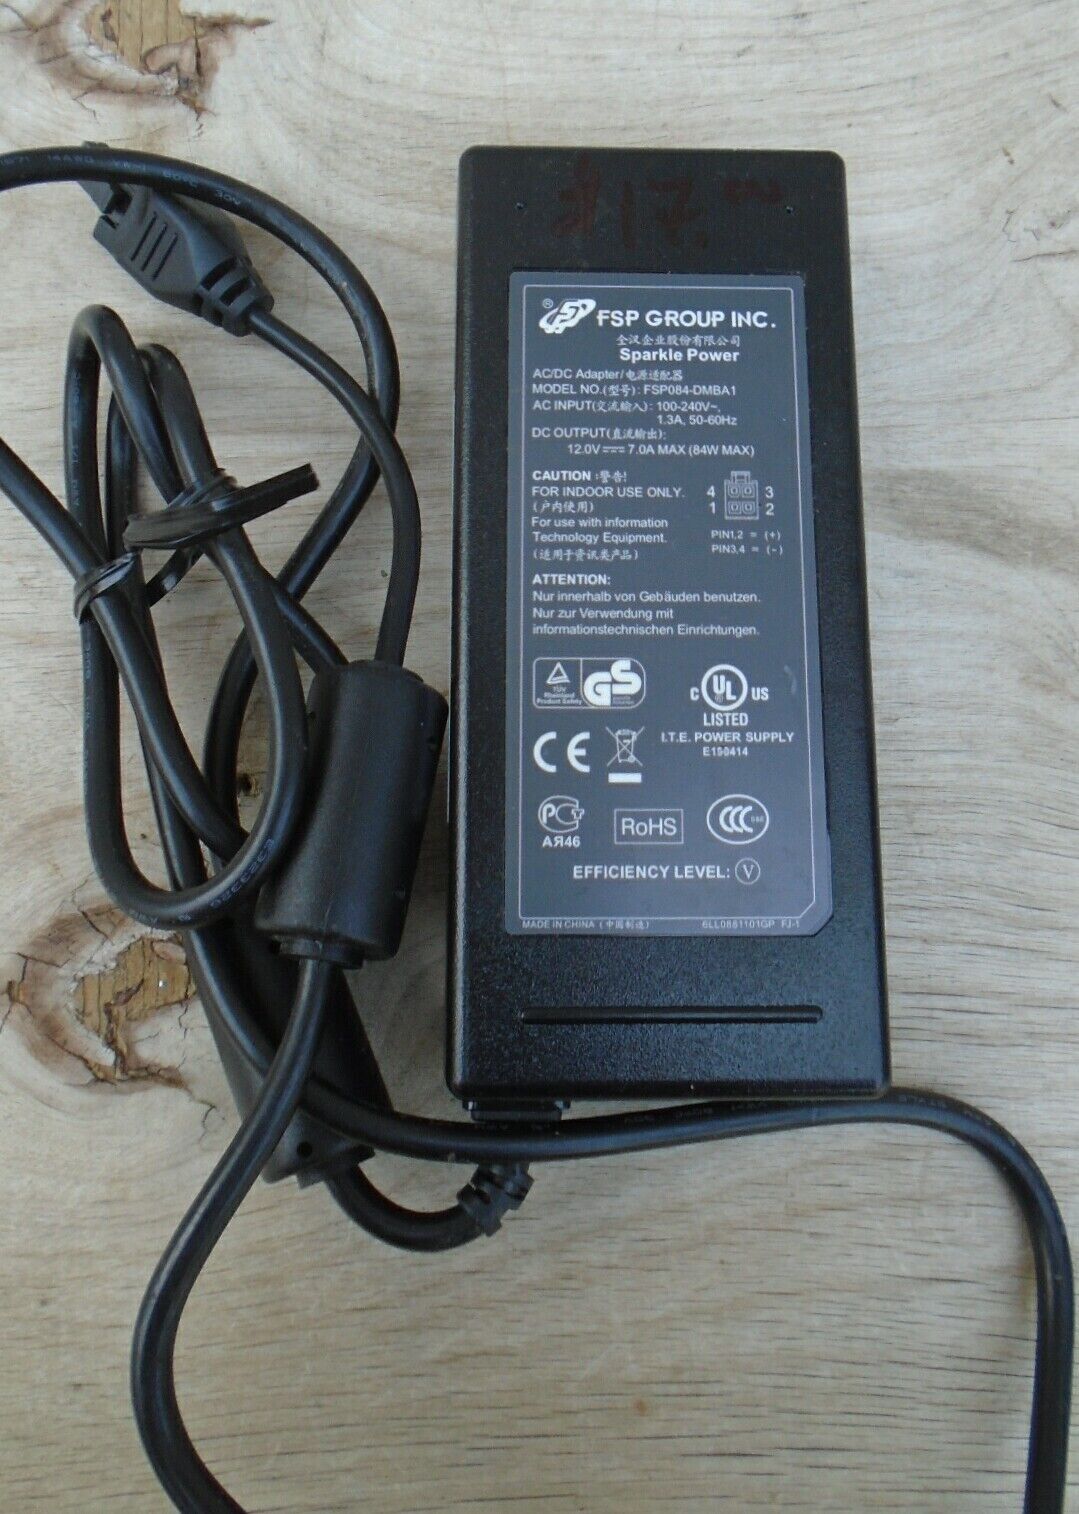 Genuine FSP FSP084-DMBA1 Switching Power Supply Adapter 12V 7A 84W 2Pin w/PC Brand FSP, FSP Group Inc Type AC/DC Adapte